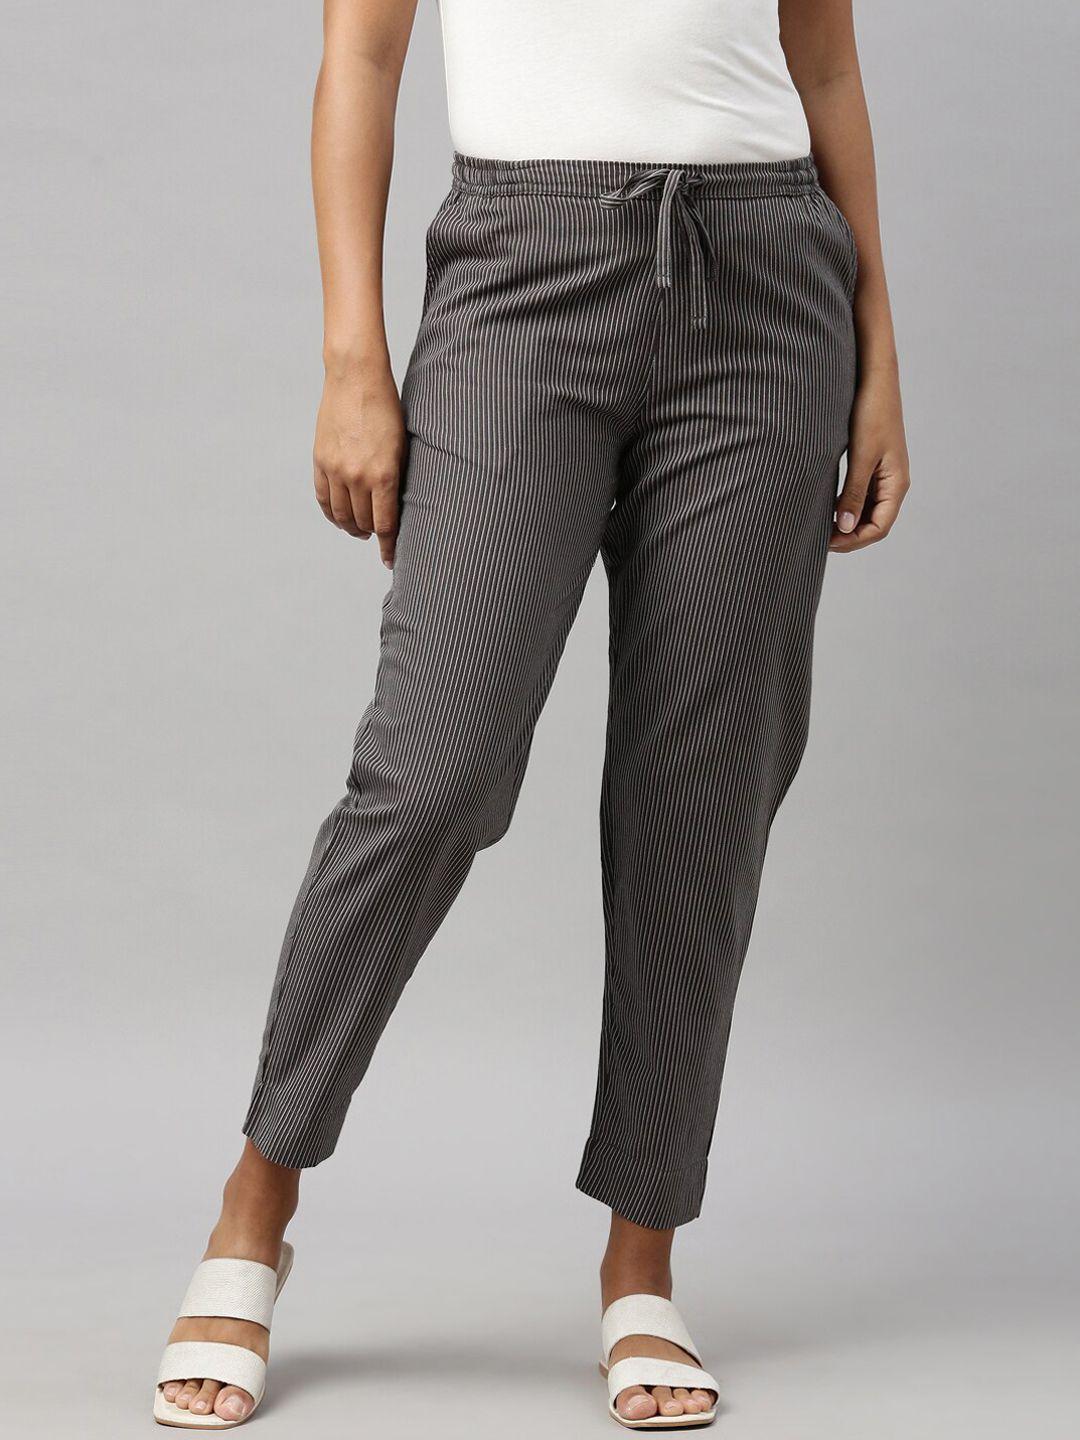 go colors women grey tapered fit trousers